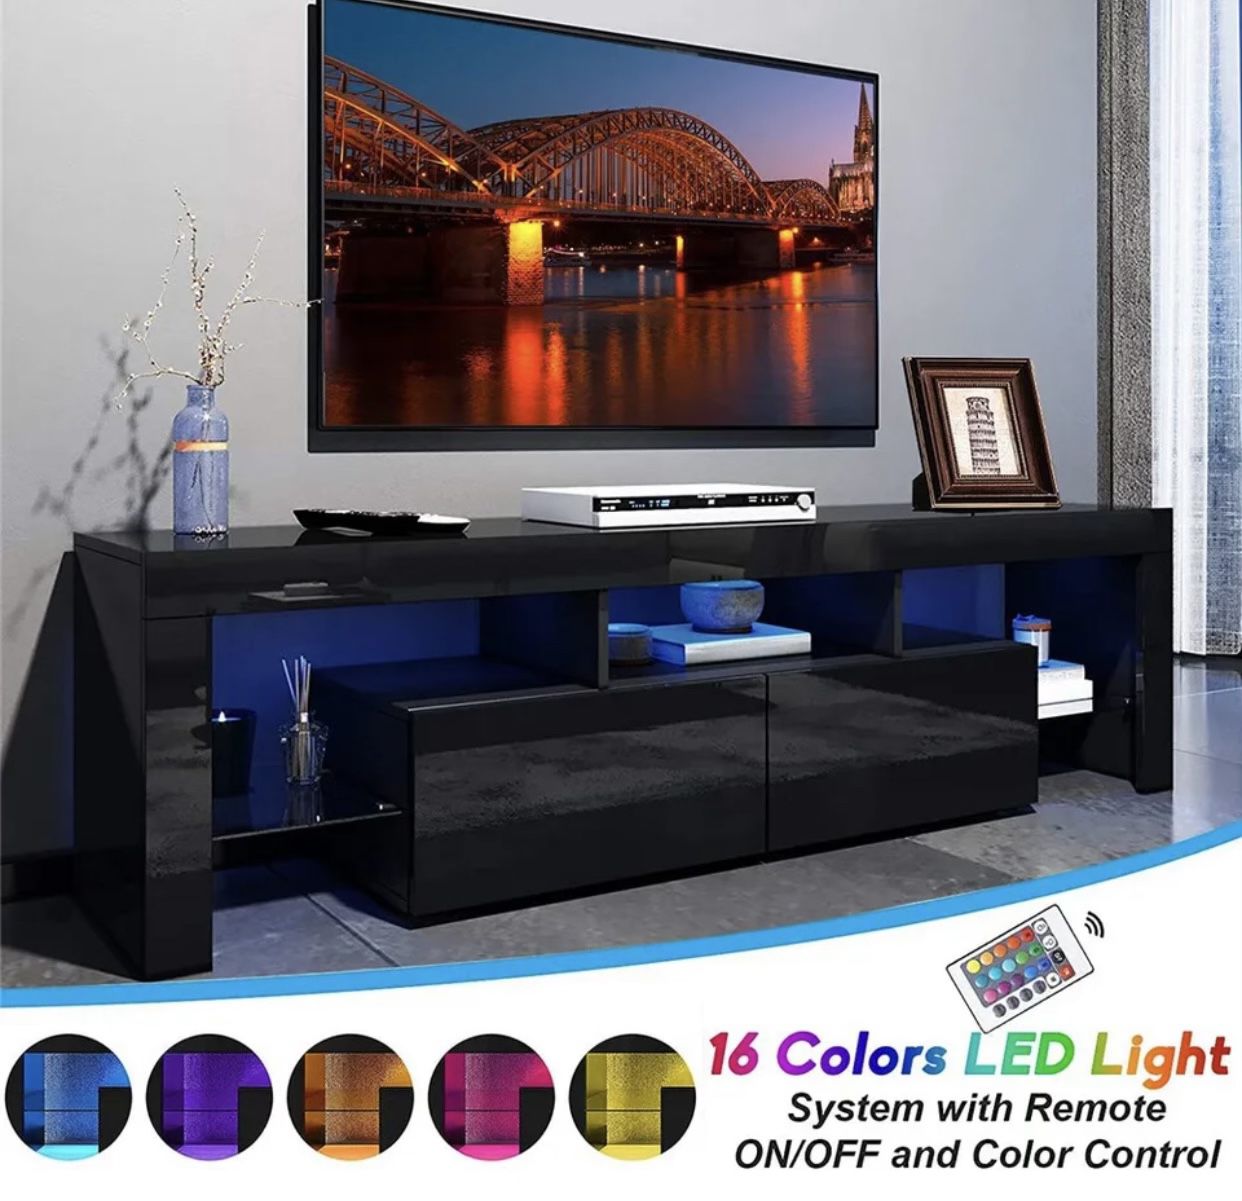 New Black Led Tv Stand 63 Inches Length Led Changing Color Lights 